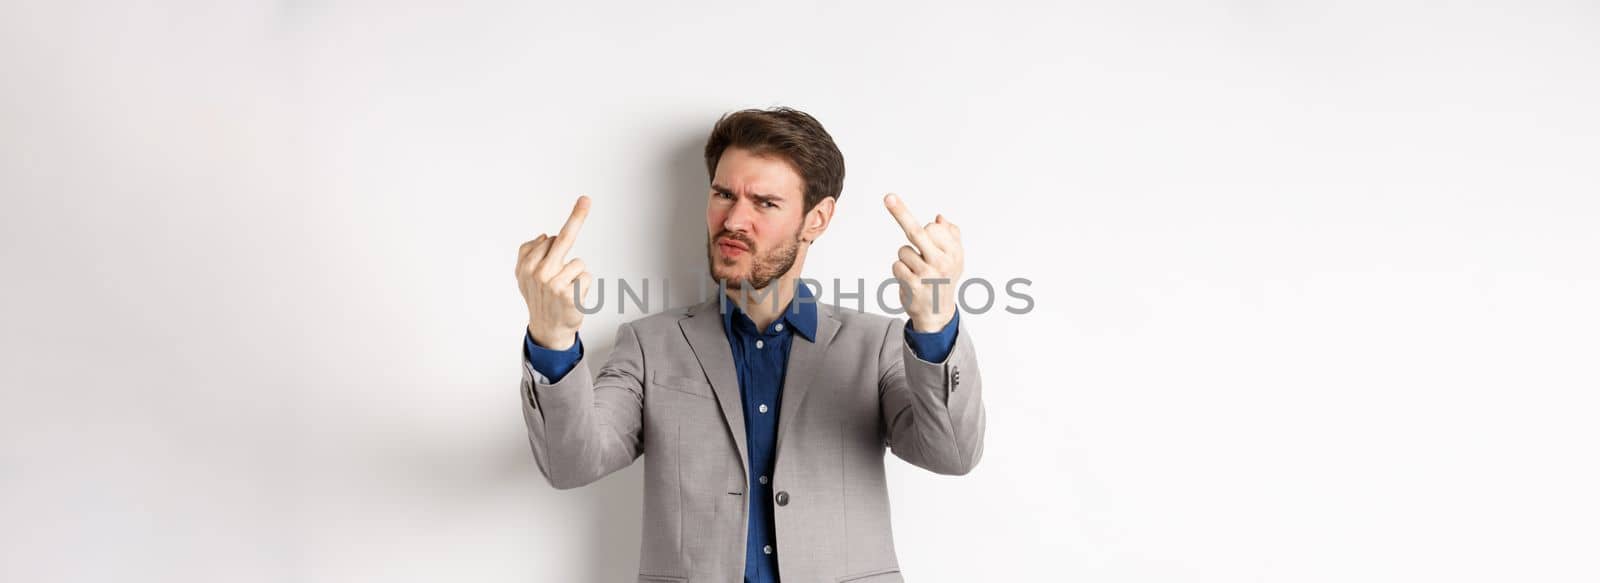 Rude businessman in suit showing middle finger, fuck you gesture, look annoyed and pissed-off, standing on white background.